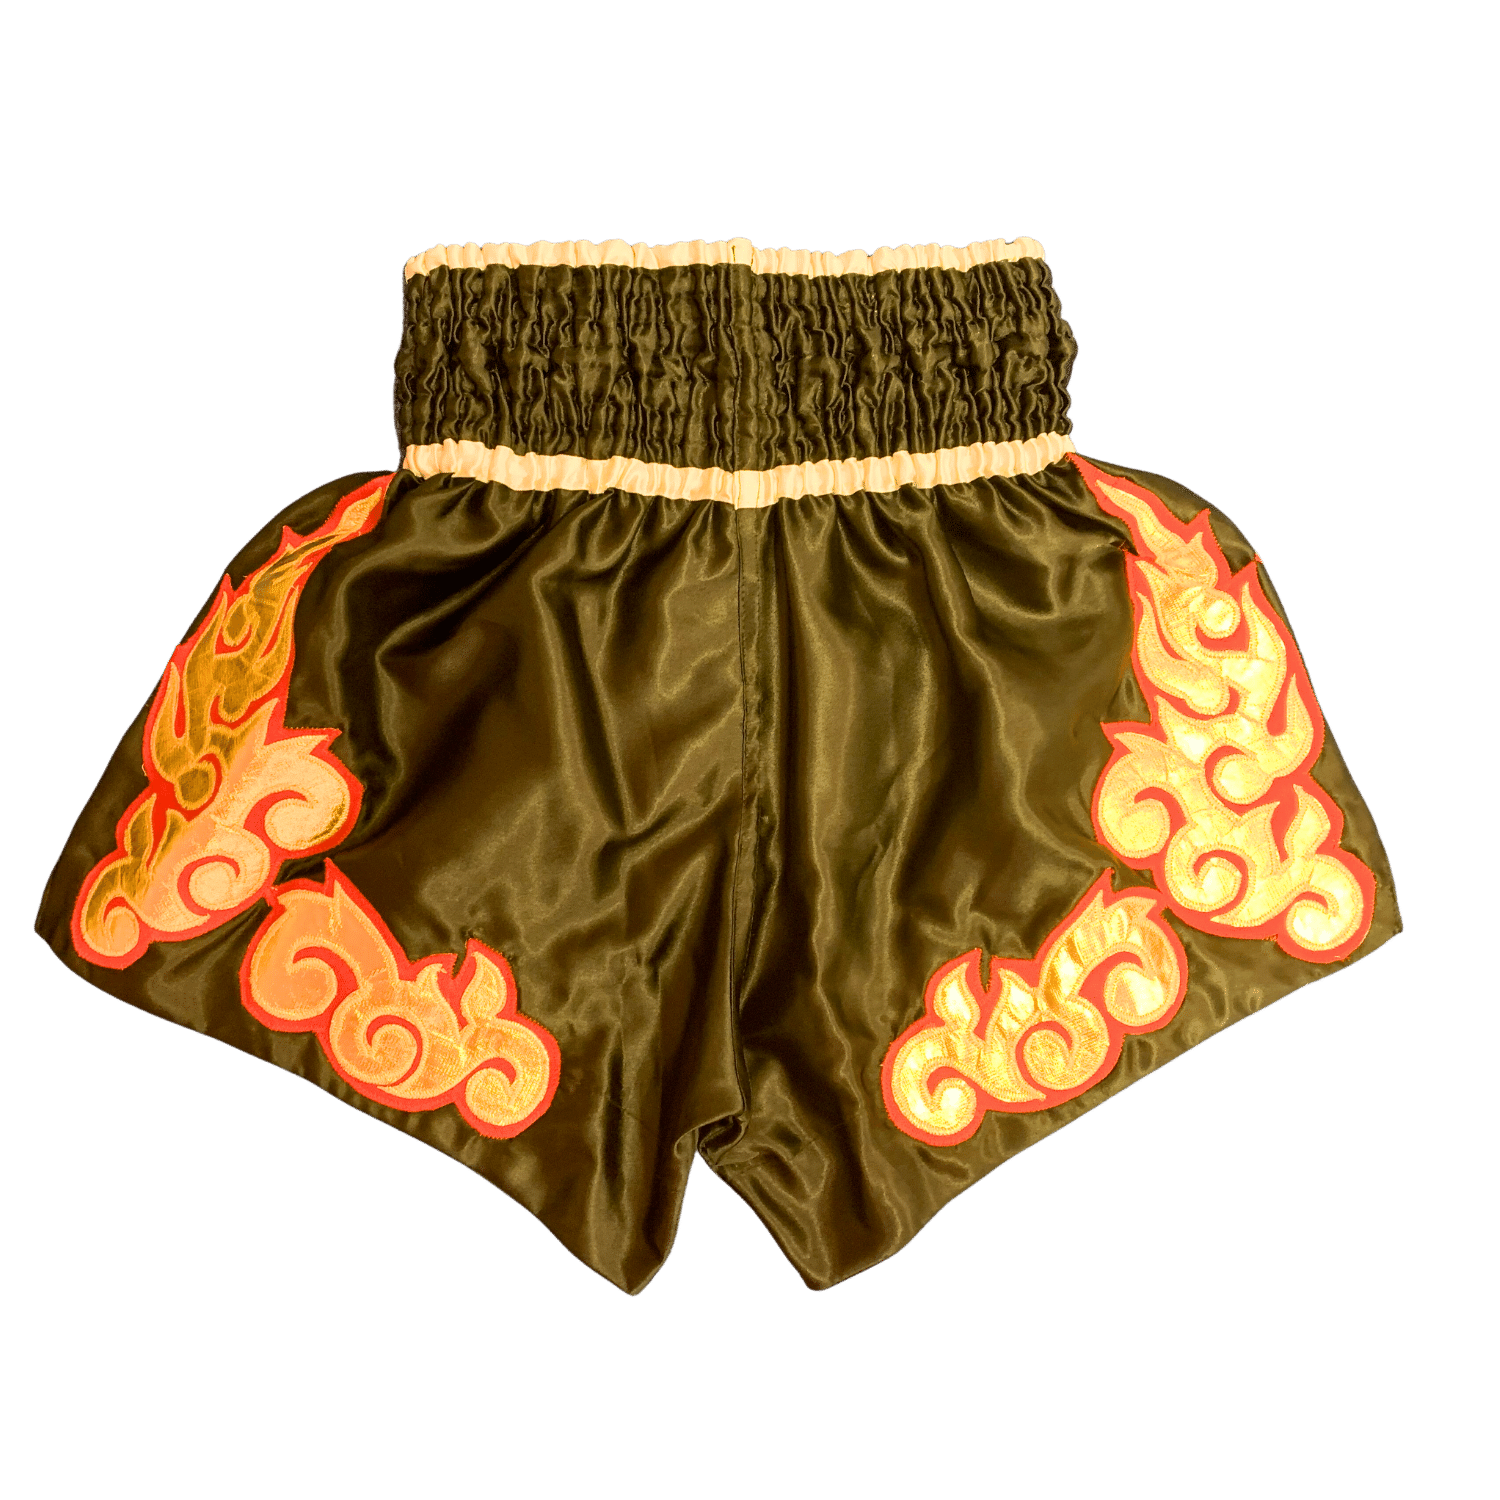 Hanuthai's Assassin's Veil Muay Thai Boxing Shorts with vibrant orange and green designs.